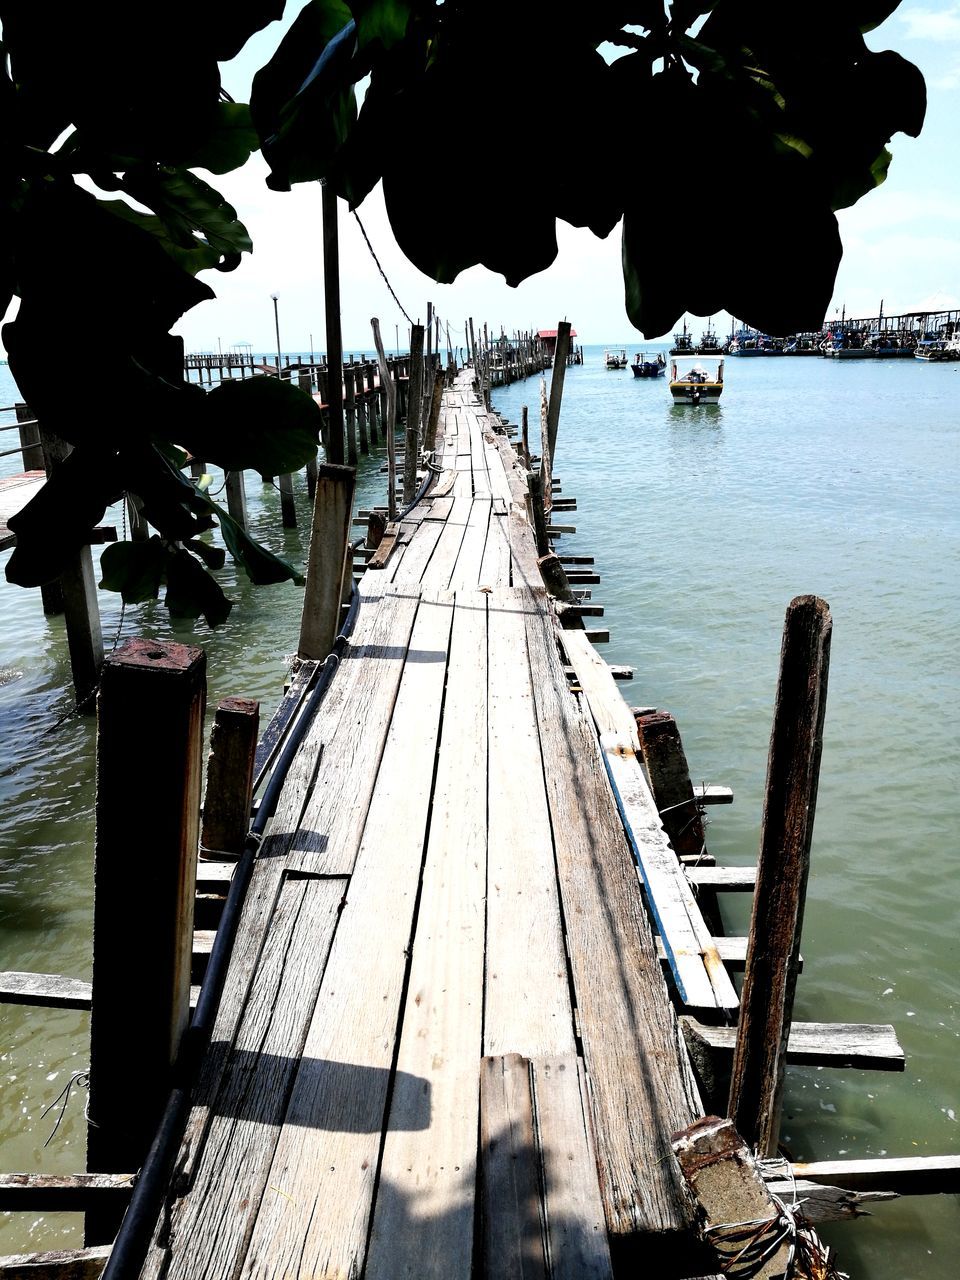 water, wood - material, pier, nature, day, direction, the way forward, bridge, transportation, architecture, built structure, wood, sea, outdoors, railing, connection, tranquility, tranquil scene, footbridge, bridge - man made structure, diminishing perspective, wood paneling, wooden post, long